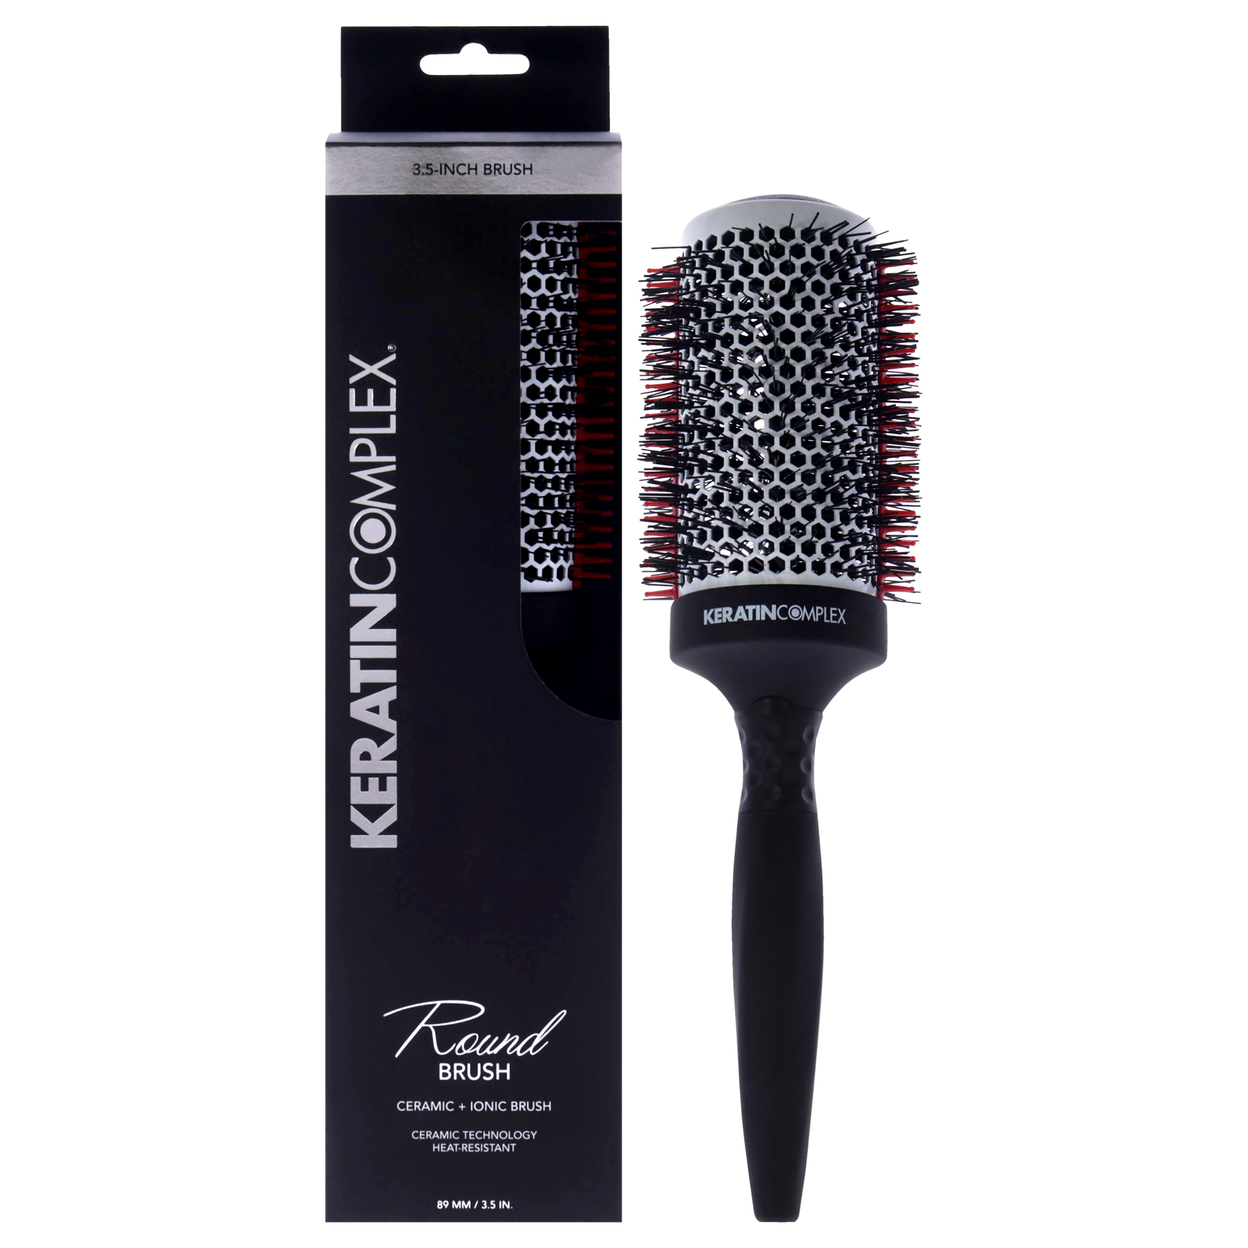 Keratin Complex Unisex HAIRCARE Thermal Round Brush 3.5 Inch